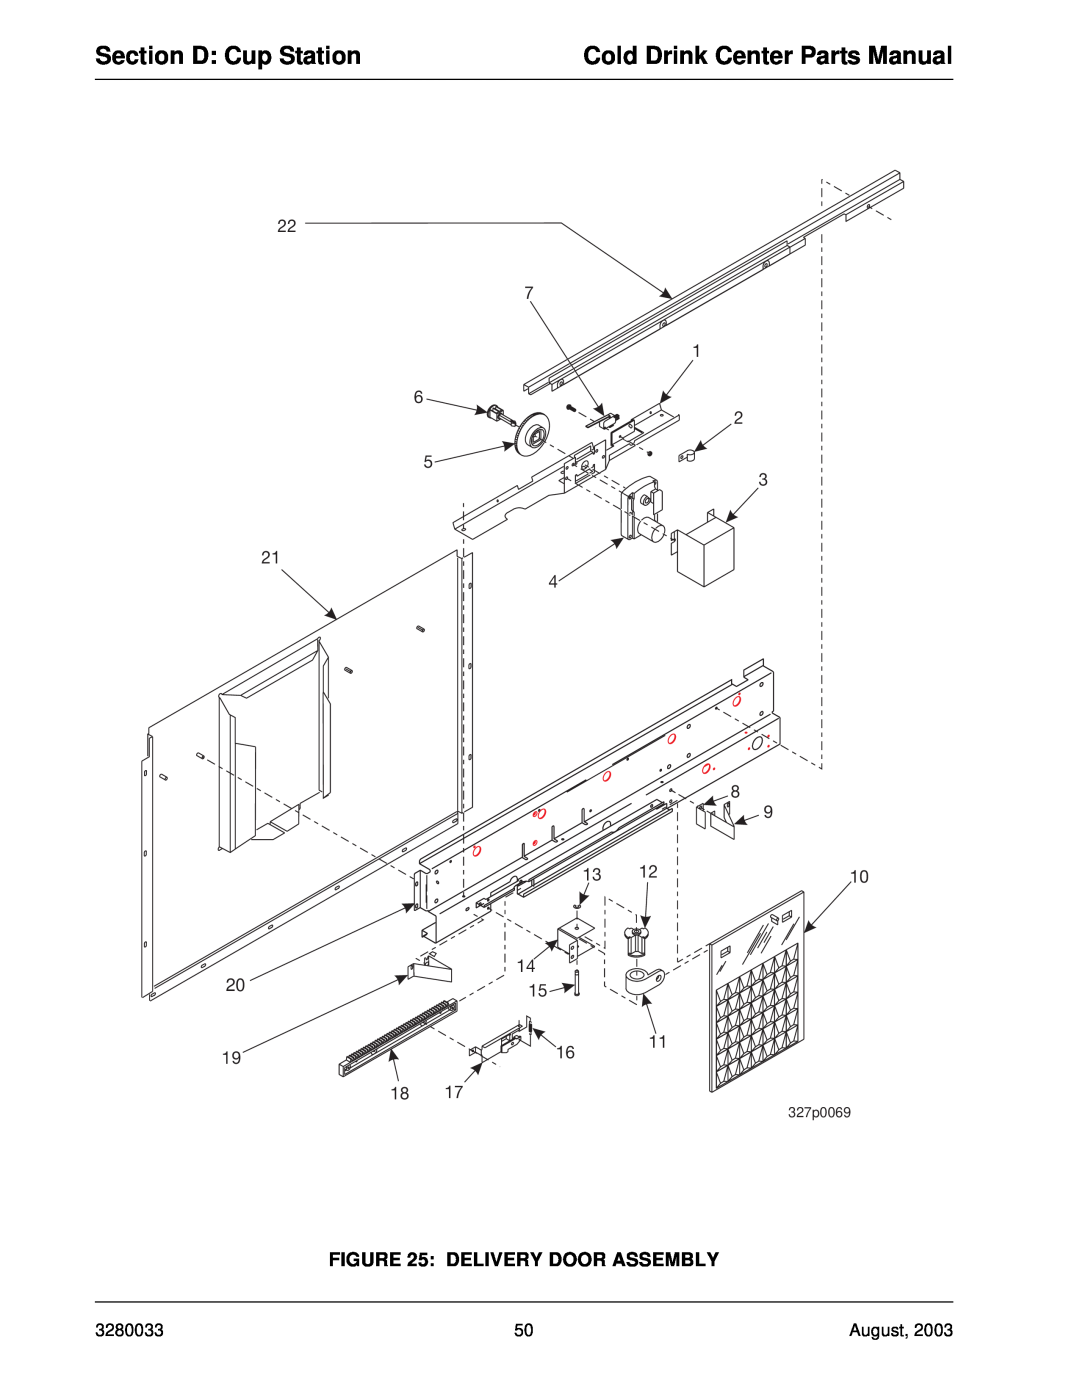 Crane Merchandising Systems 328 Section D Cup Station, Cold Drink Center Parts Manual, Delivery Door Assembly, 327p0069 